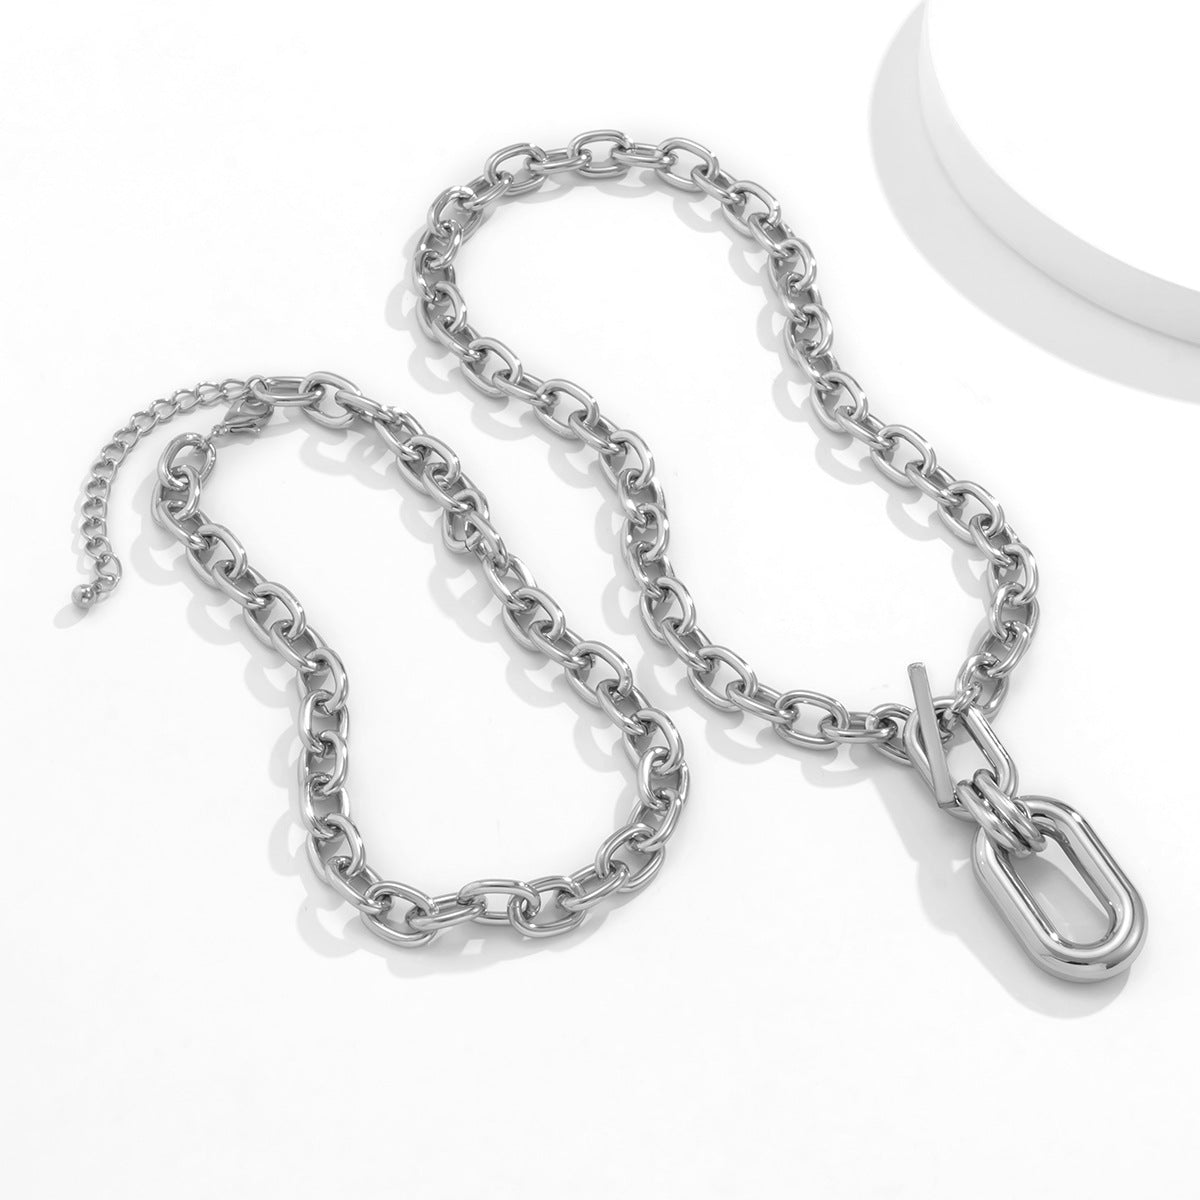 N11508 Chunky Double Layers Chain Pendant Necklace